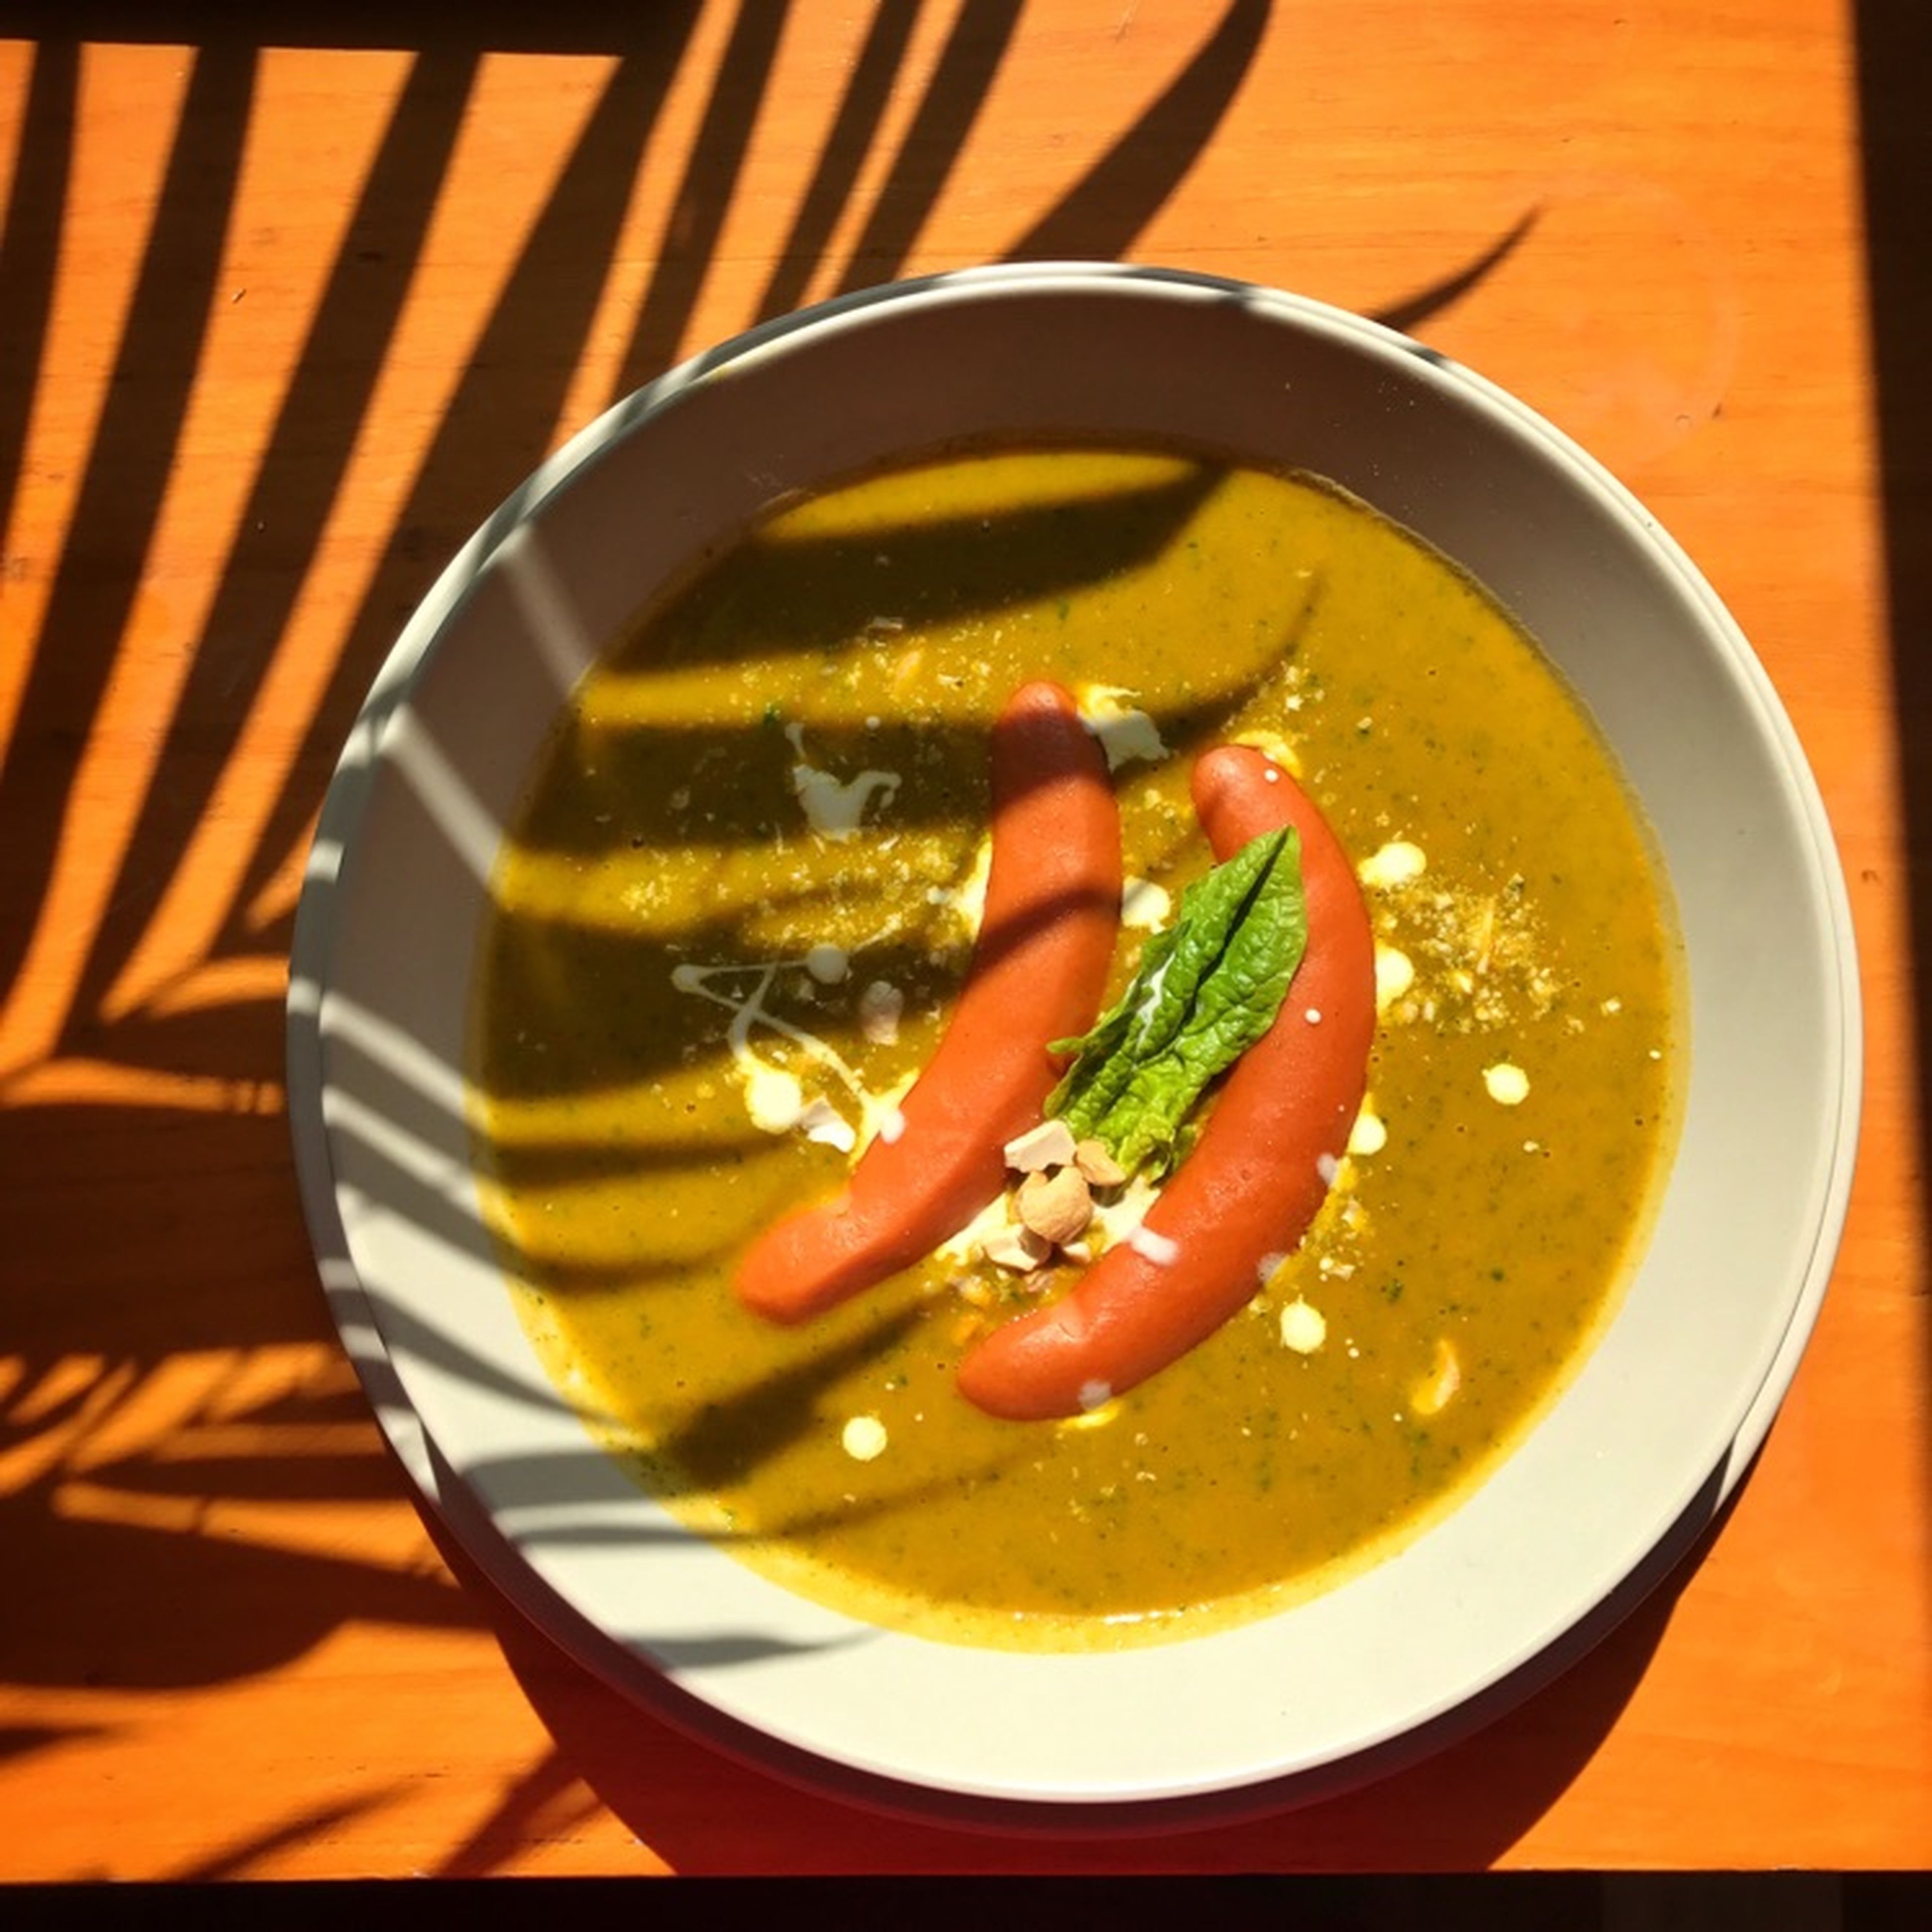 Curried carrot and pumpkin soup